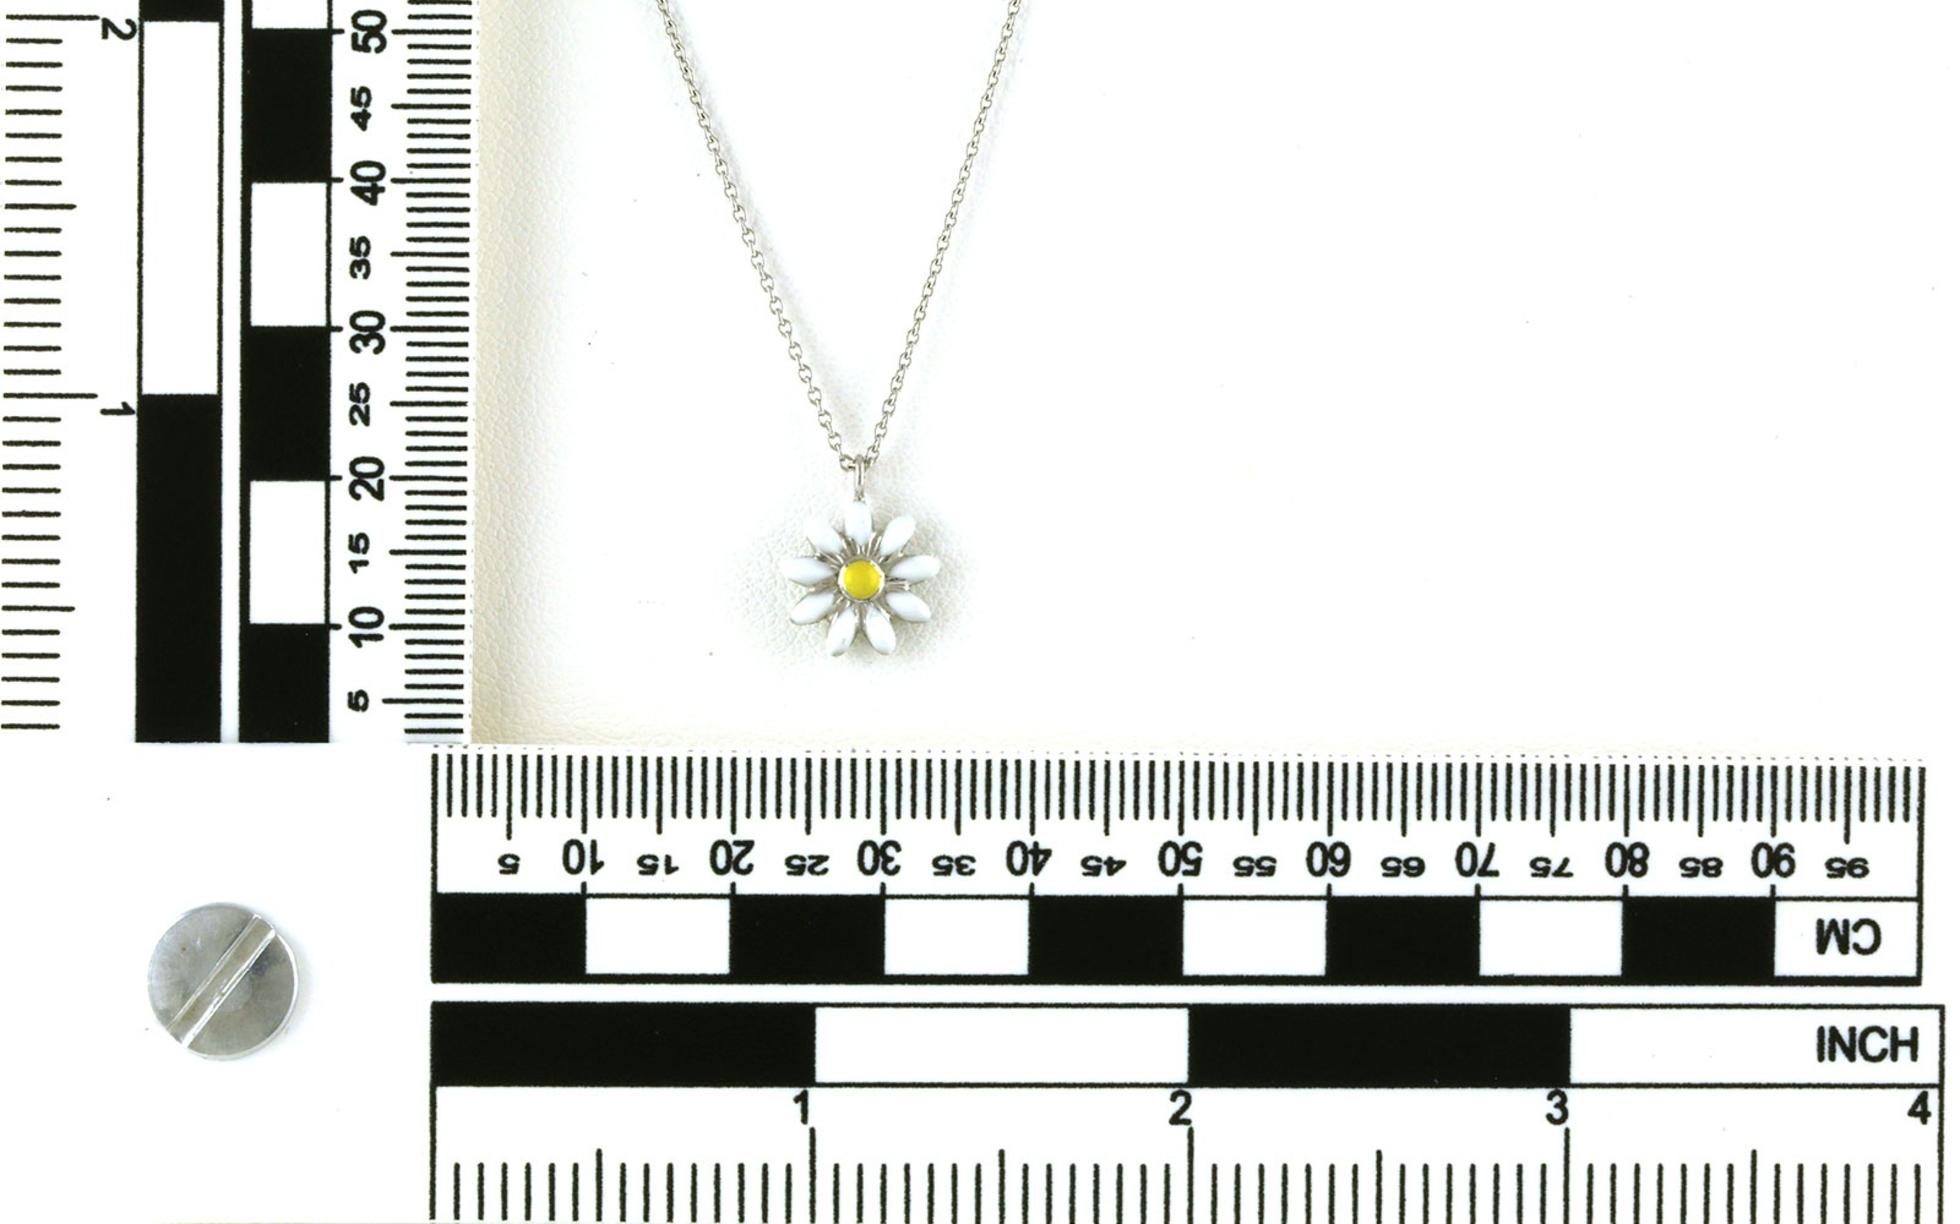 Children's Enameled Daisy Necklace in Sterling Silver Scale